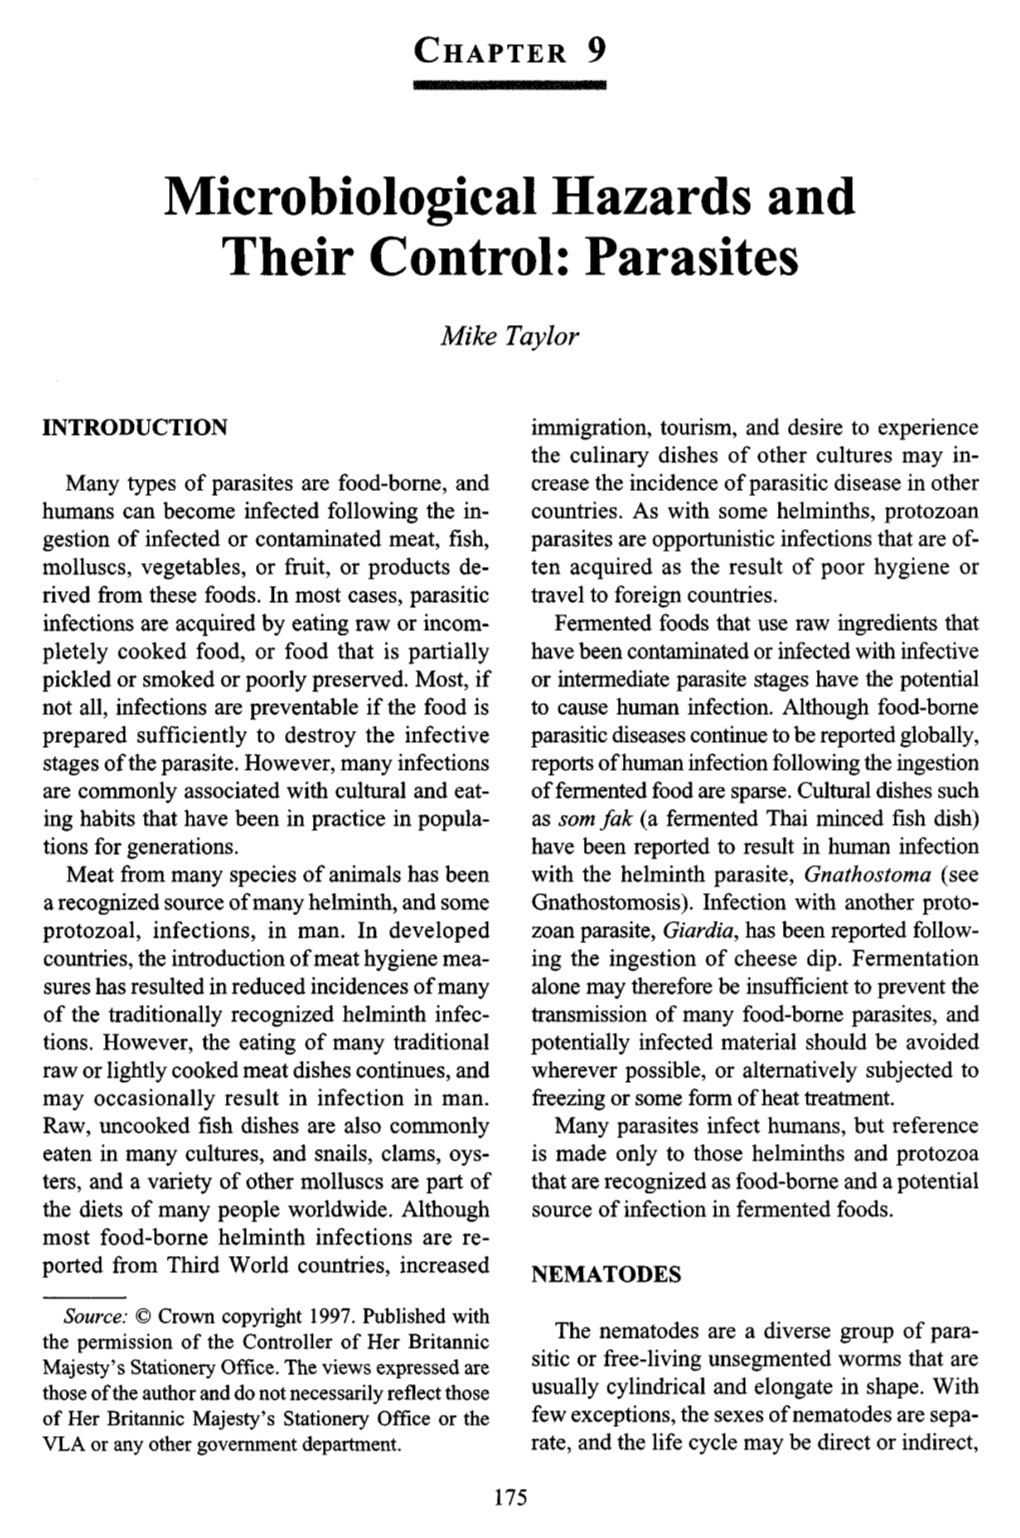 Microbiological Hazards and Their Control: Parasites